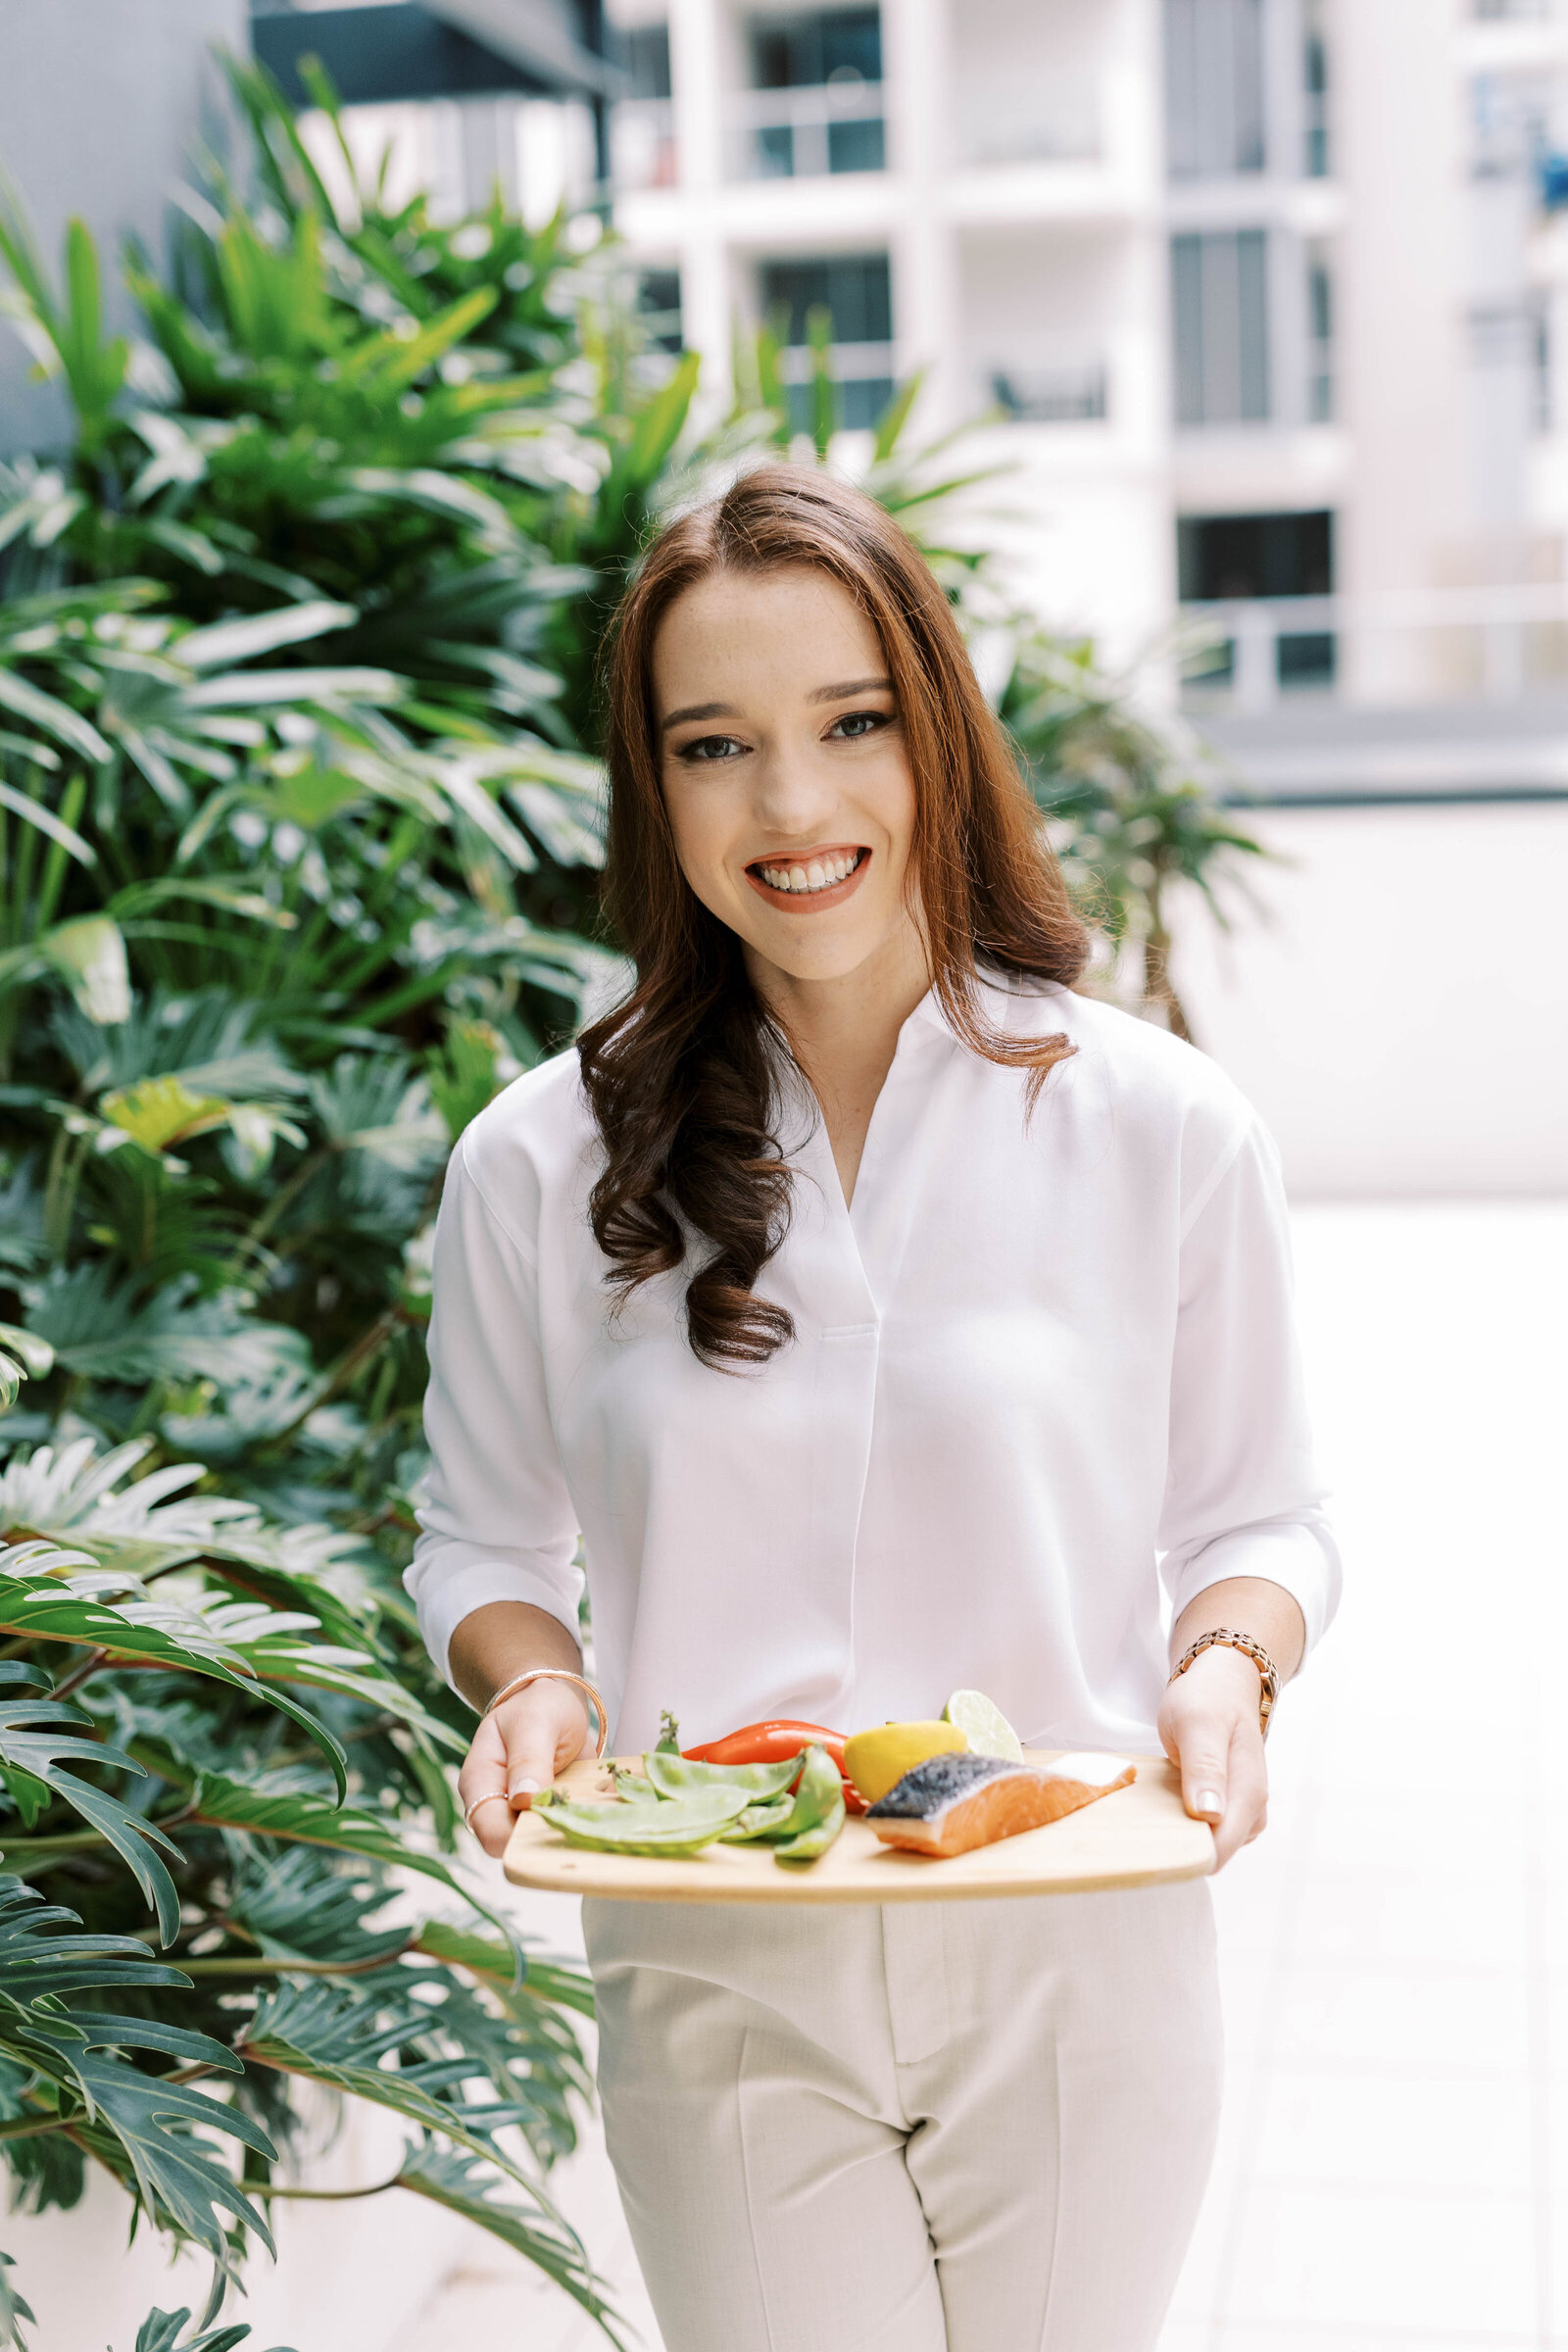 Dedicated dietitian in Brisbane offering a platter of nutritious foods, symbolising a balanced approach to gut health